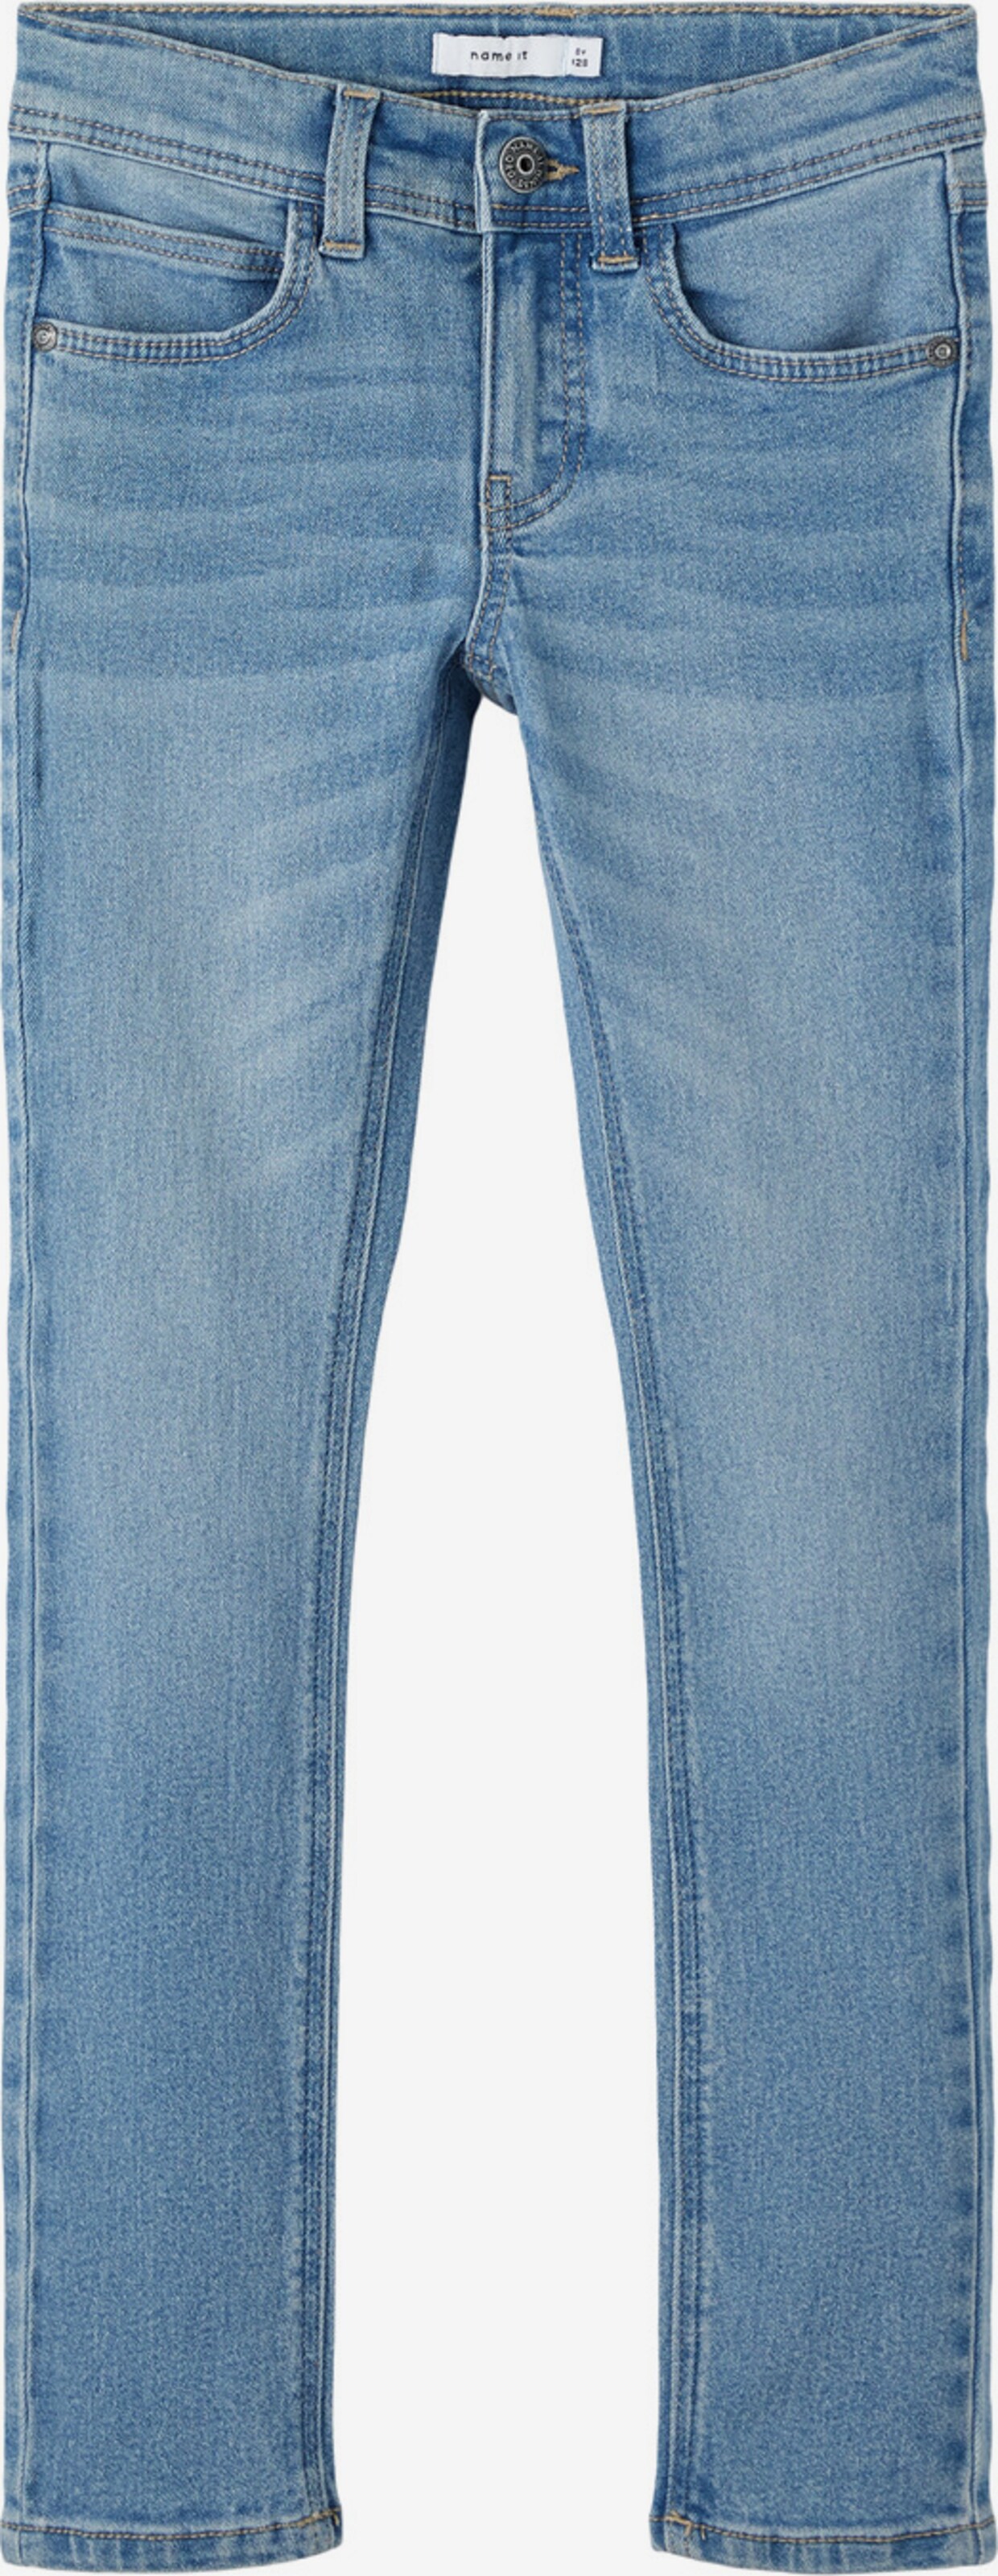 NAME IT Slim fit Jeans 'Theo' in Light Blue | ABOUT YOU